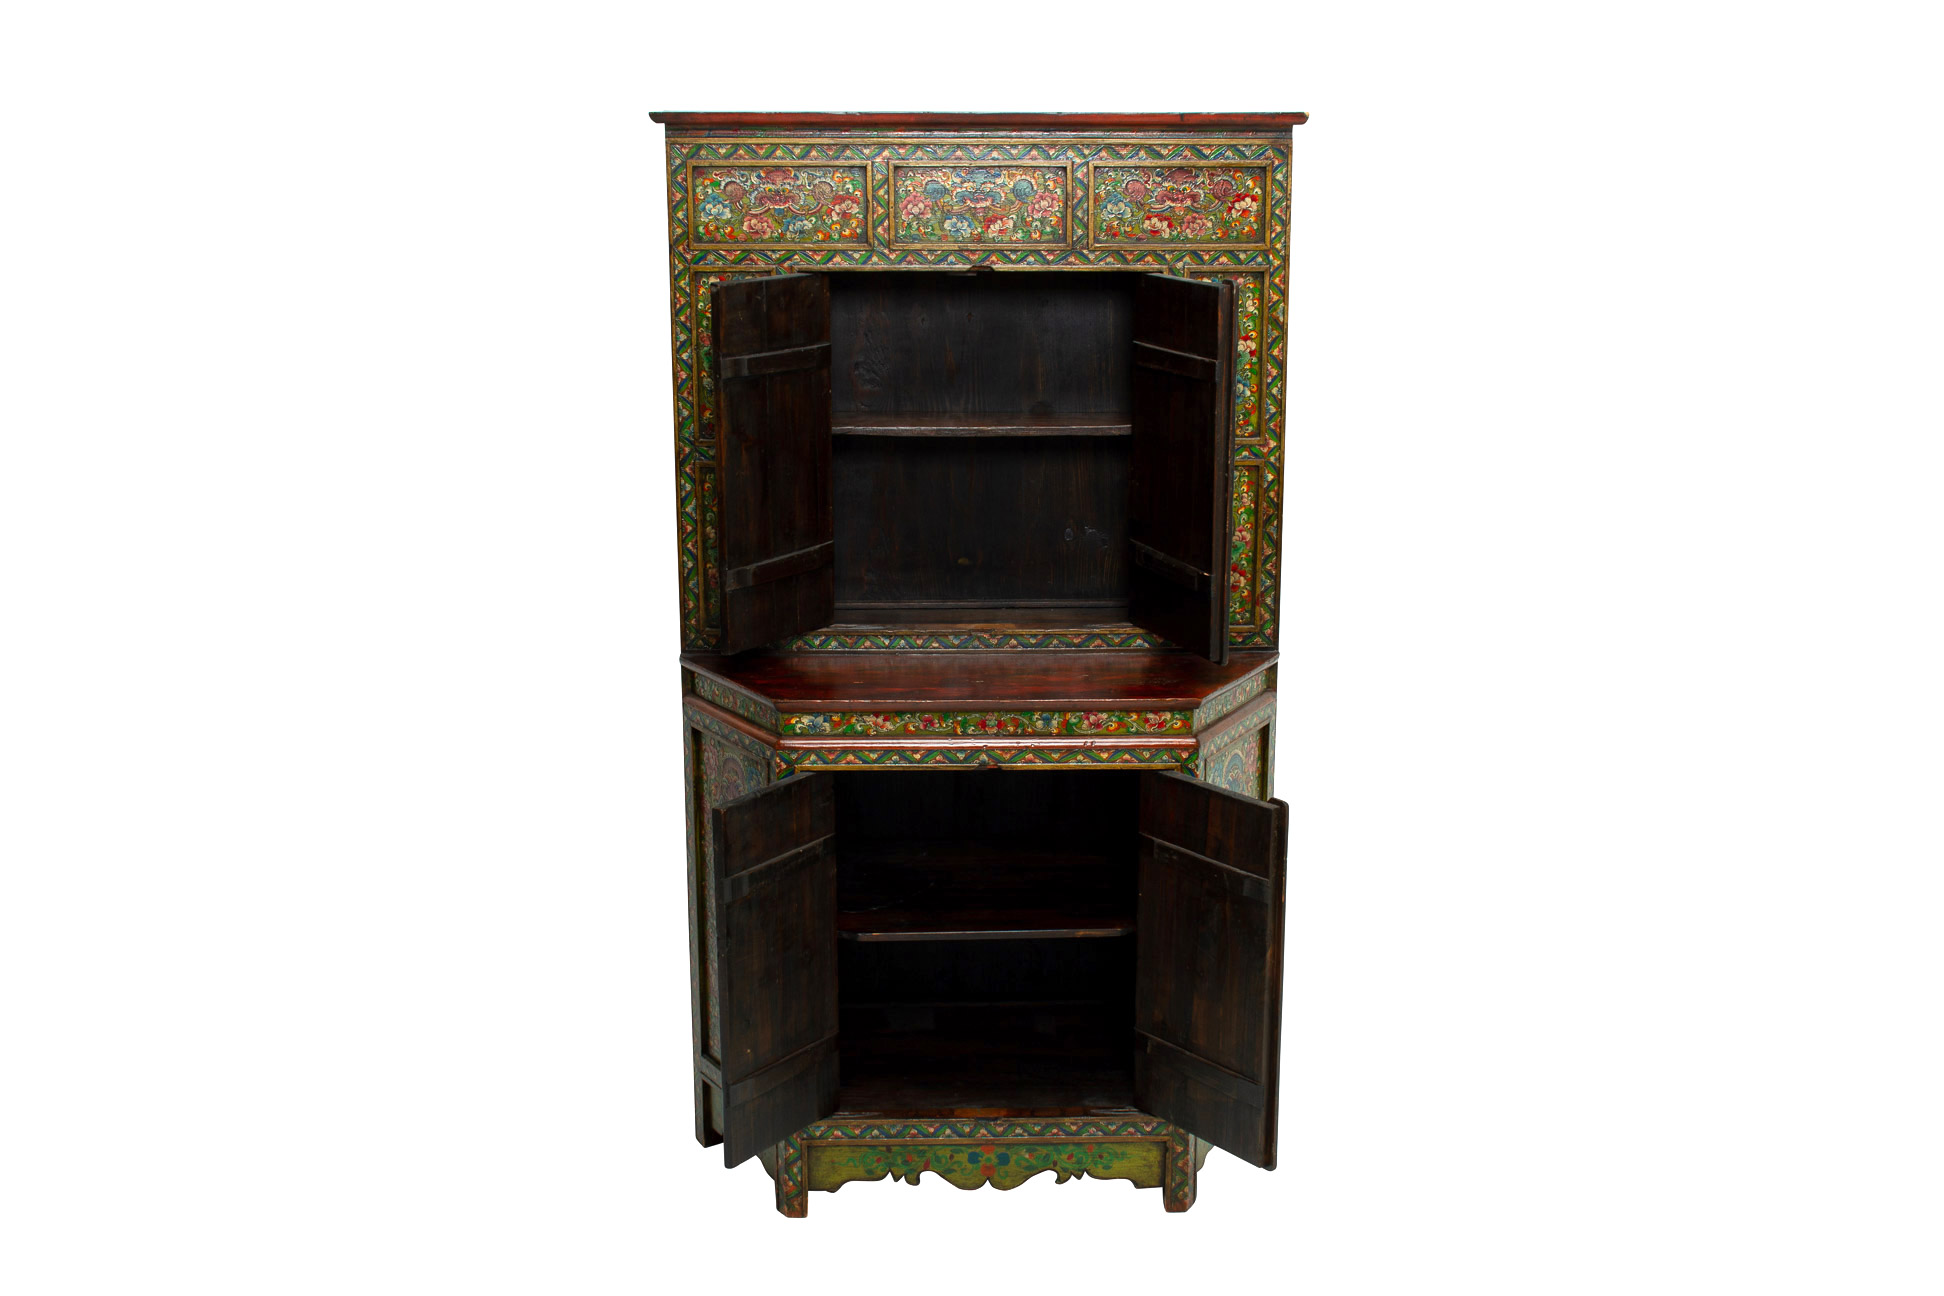 A TIBETAN POLYCHROME DECORATED CABINET - Image 3 of 3